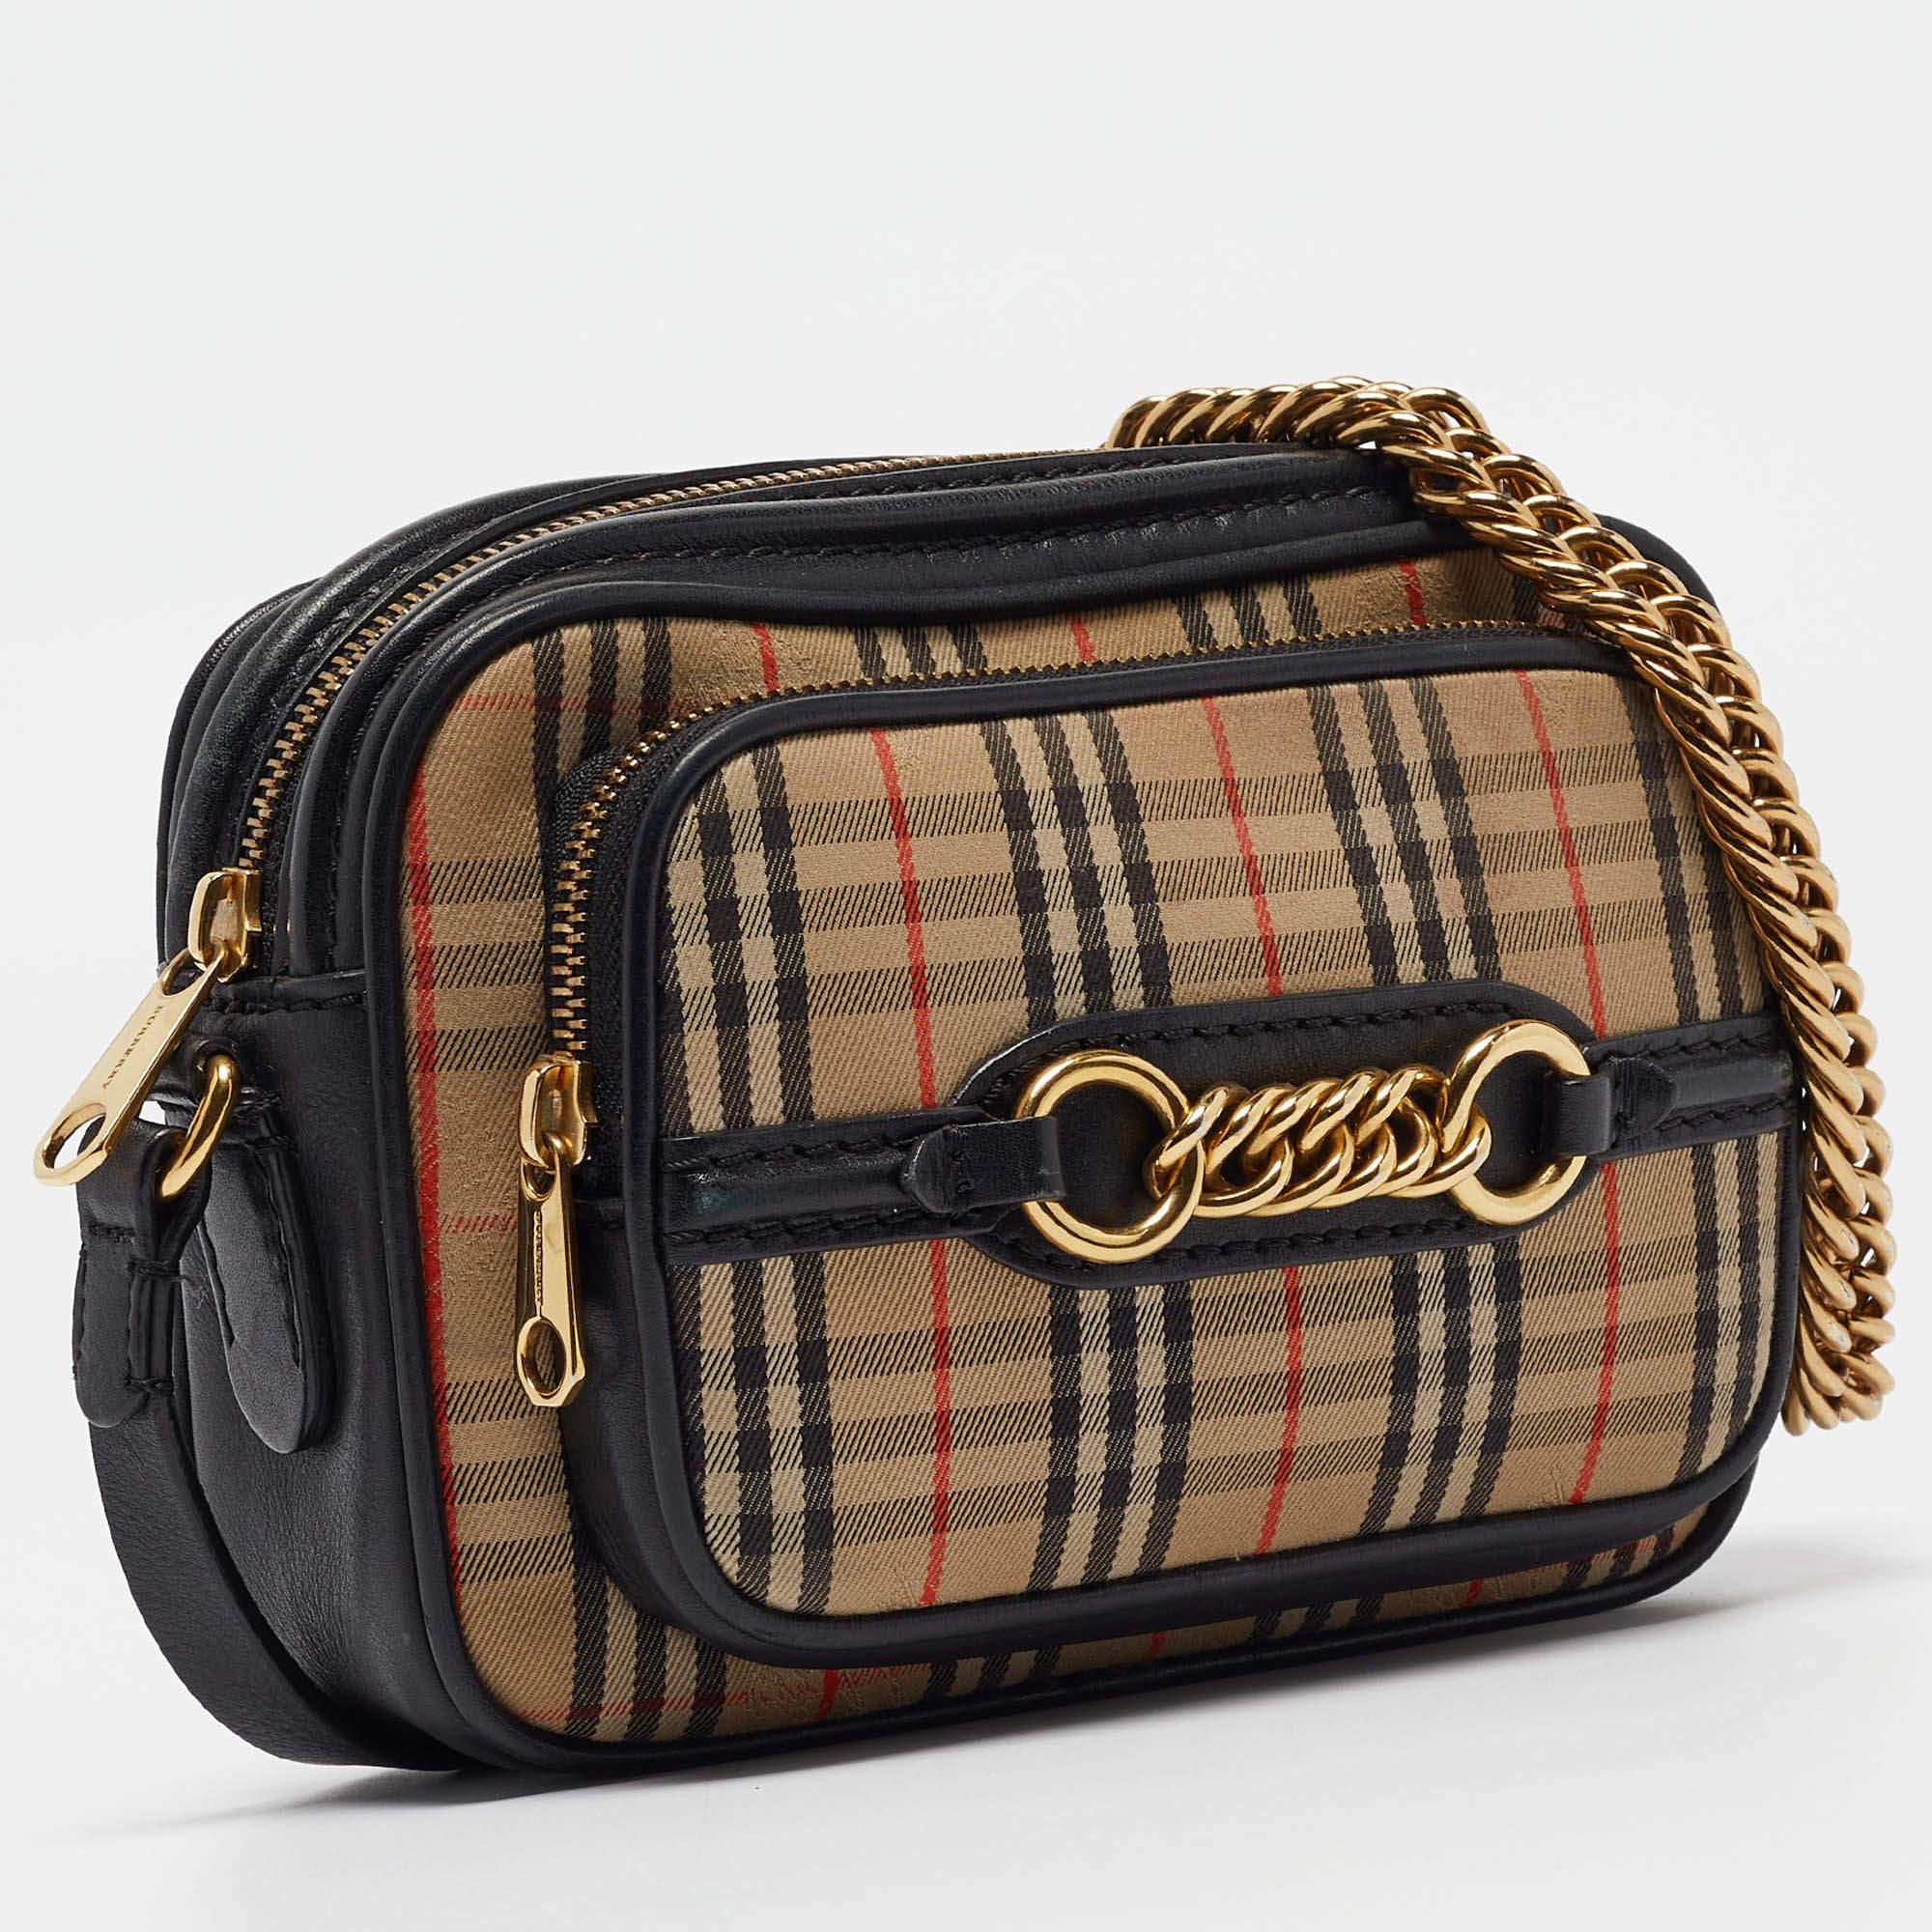 Burberry Black/Beige 1983 Knight Check Fabric and Leather Link Bum Belt Bag In Good Condition For Sale In Dubai, Al Qouz 2